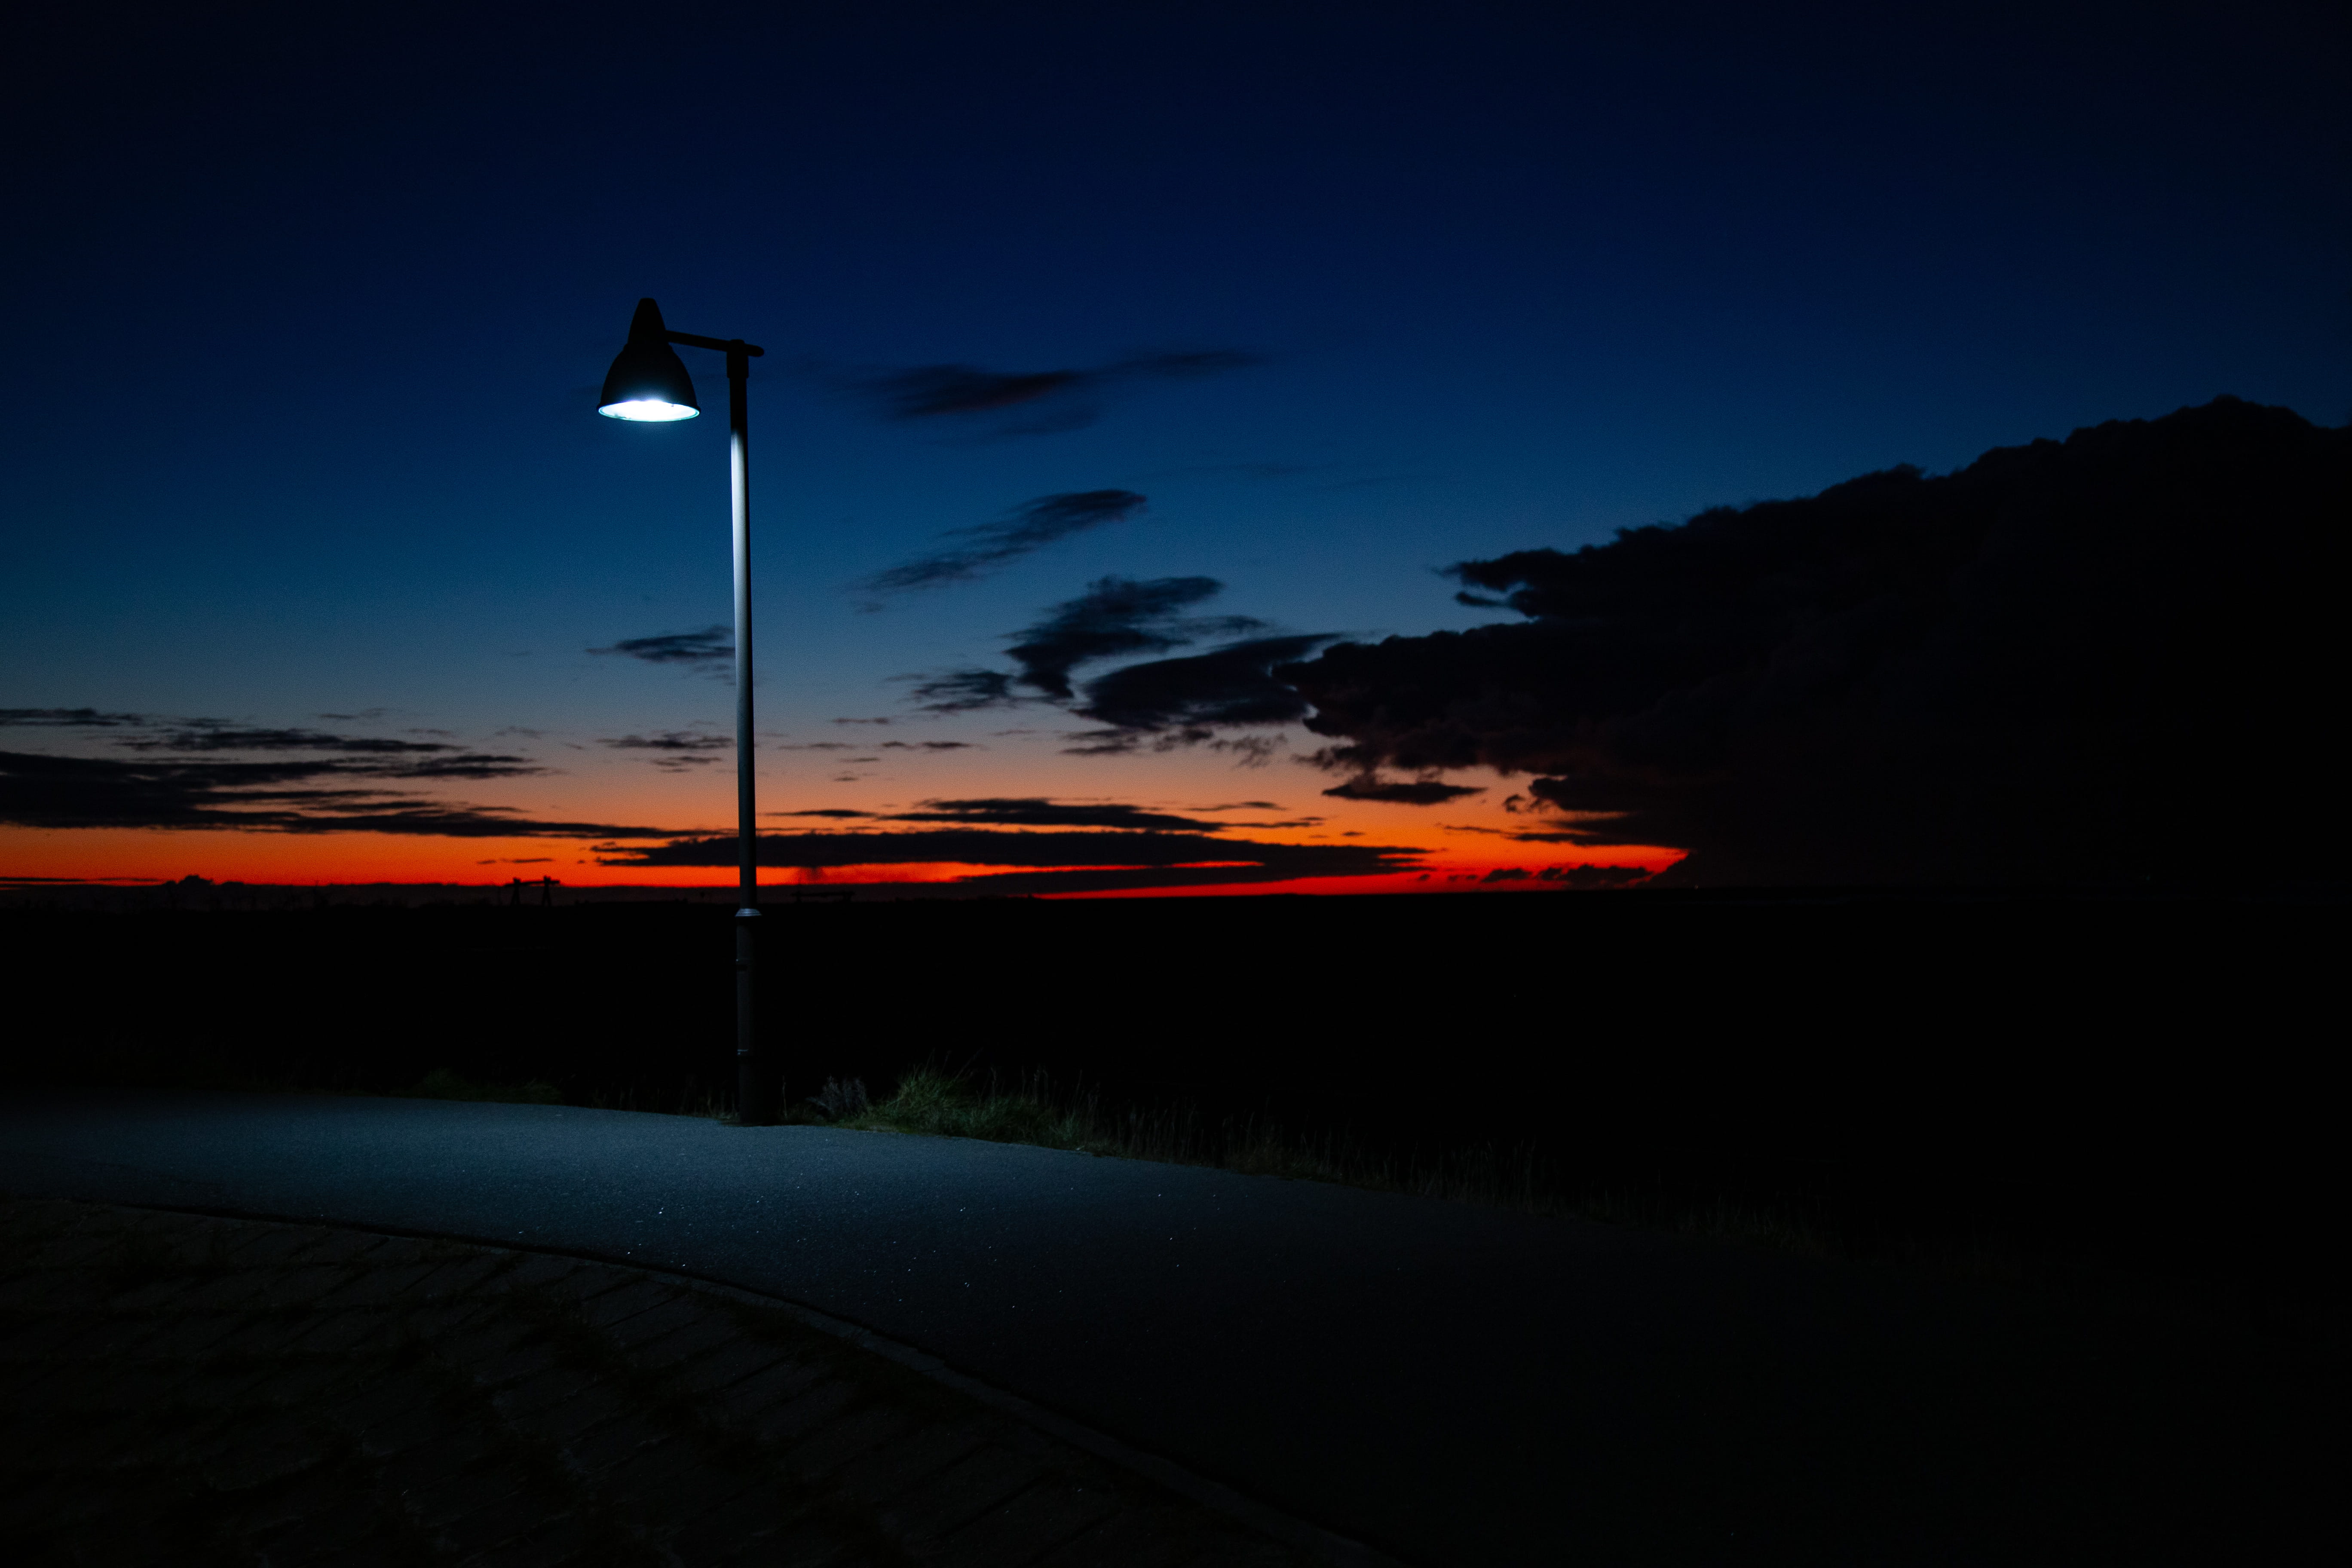 lighted outdoor lamp during nightime, lamp post, ostfriesland